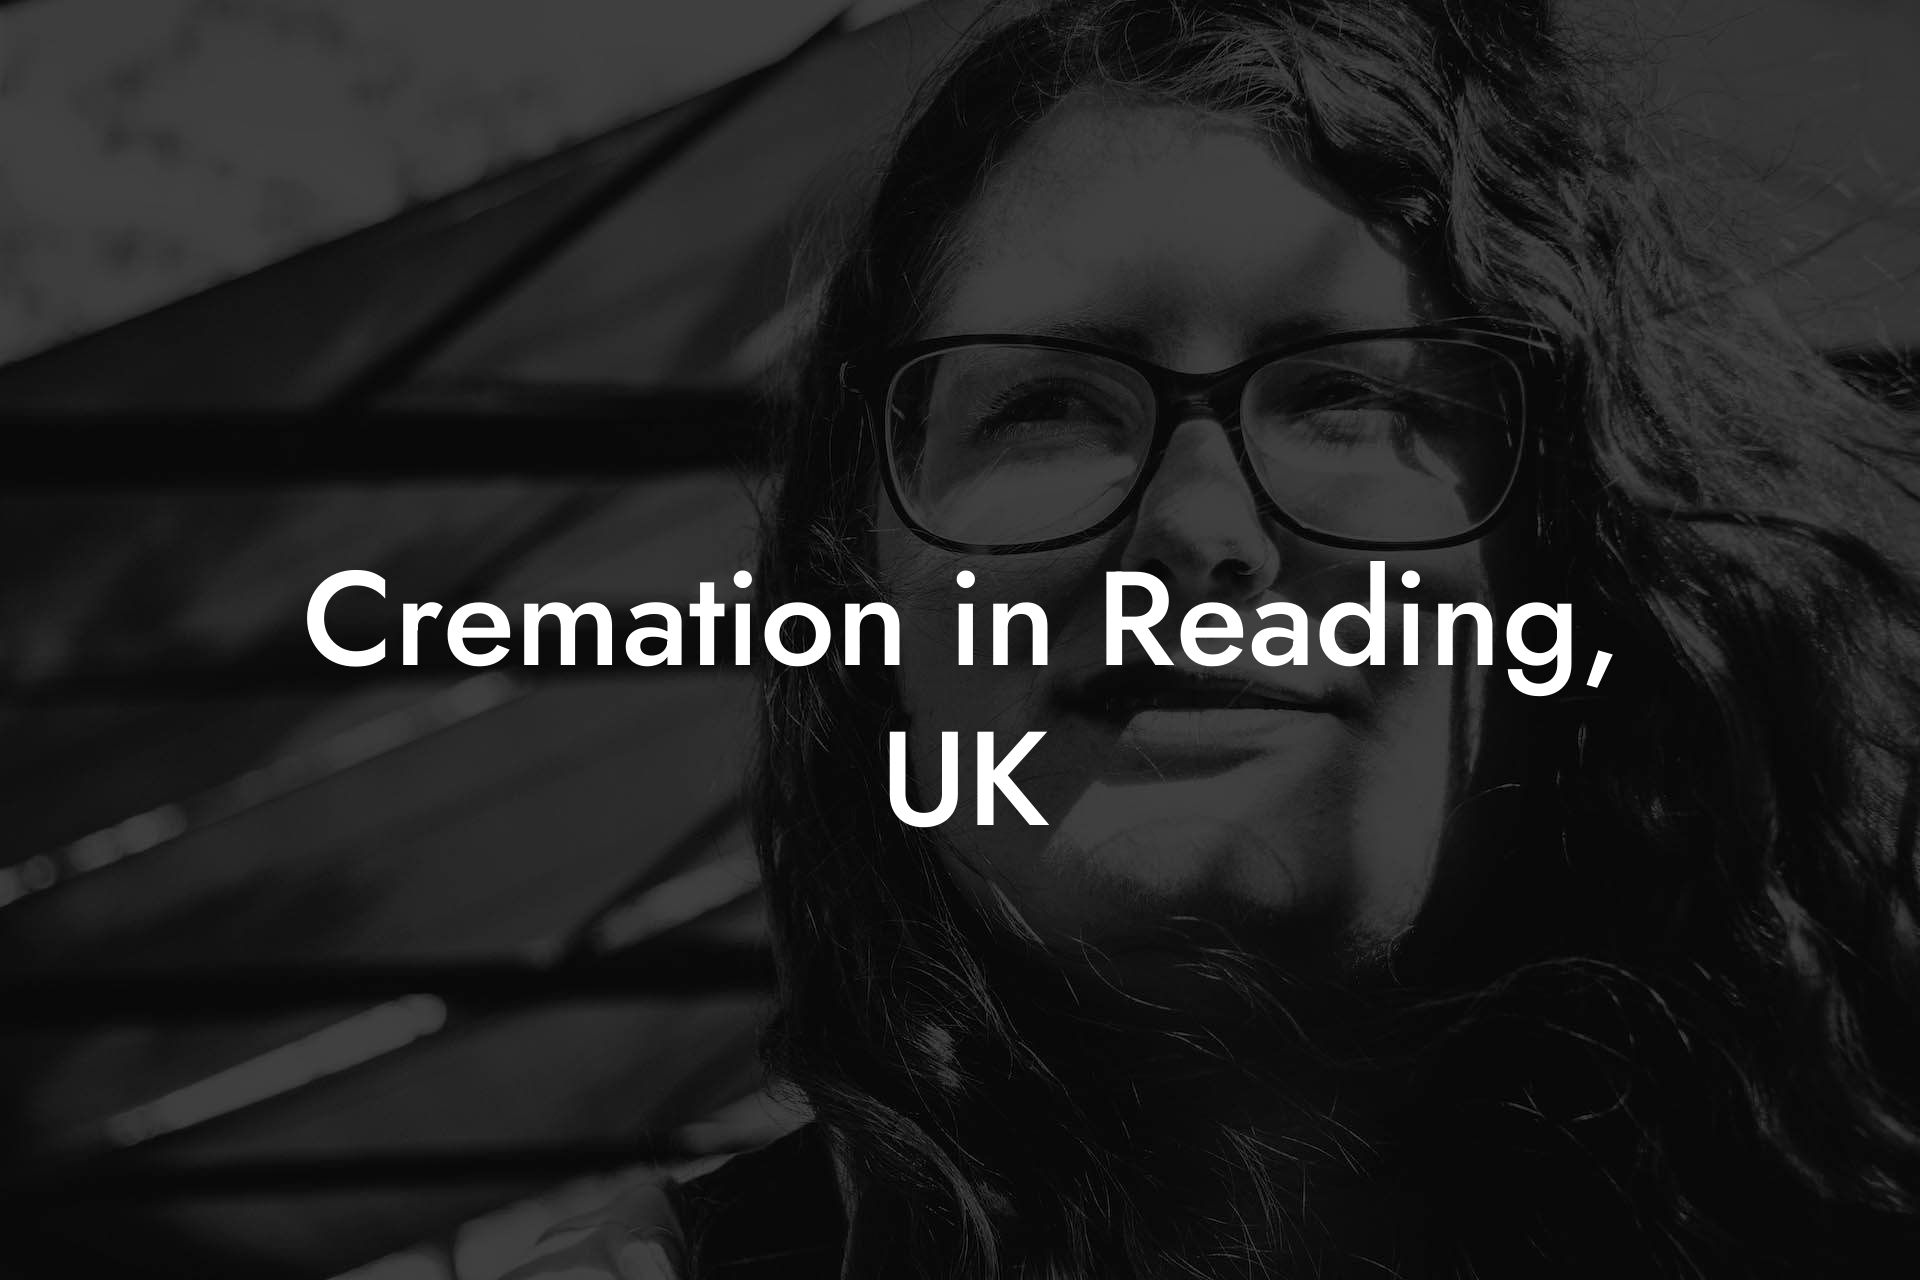 Cremation in Reading, UK